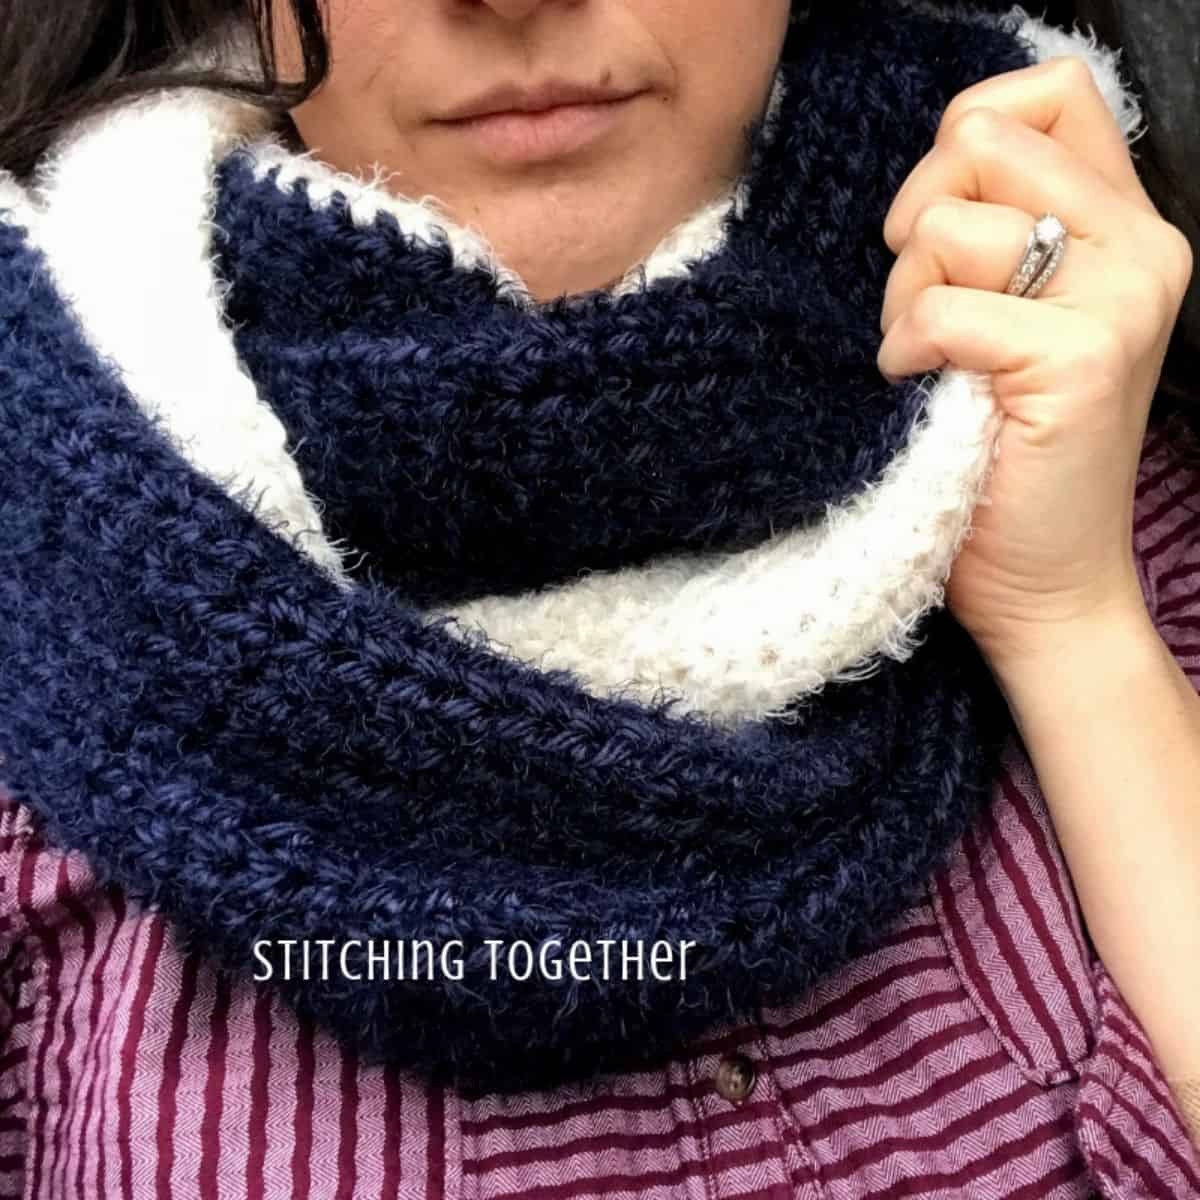 blue and white crochet scarf on a woman